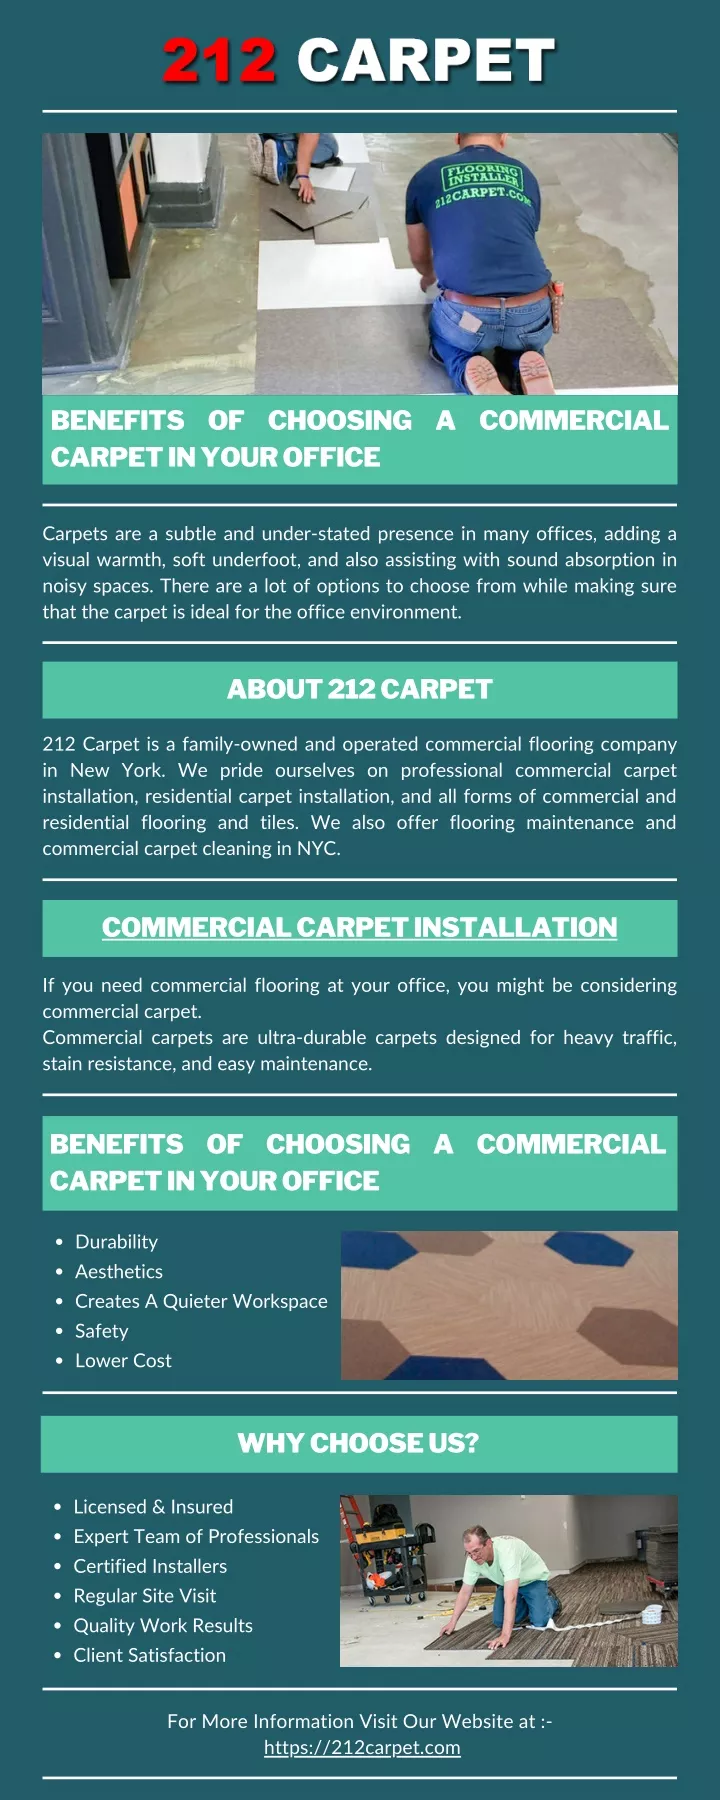 benefits of choosing a commercial carpet in your